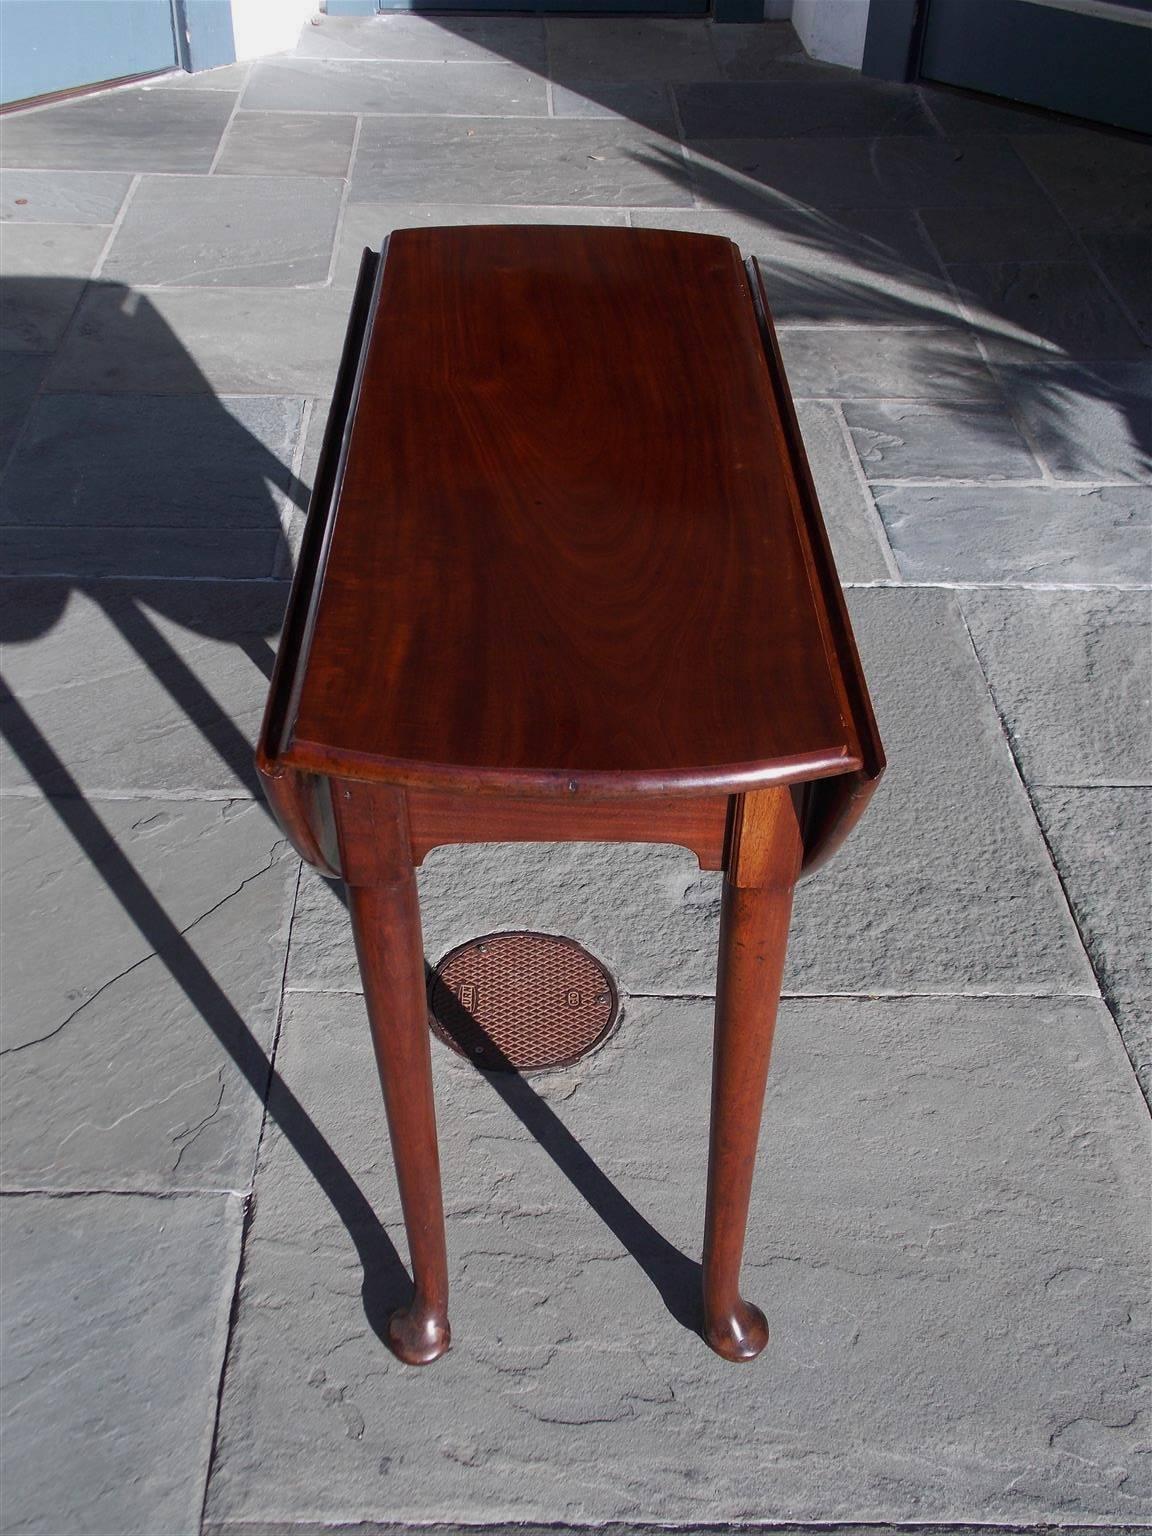 English Queen Anne Cuban mahogany drop-leaf occasional table with two leaves supported by swing out gate legs, carved centered skirts, and terminating on the original tapered rounded legs with pad feet, Early 18th century. Secondary wood consist of